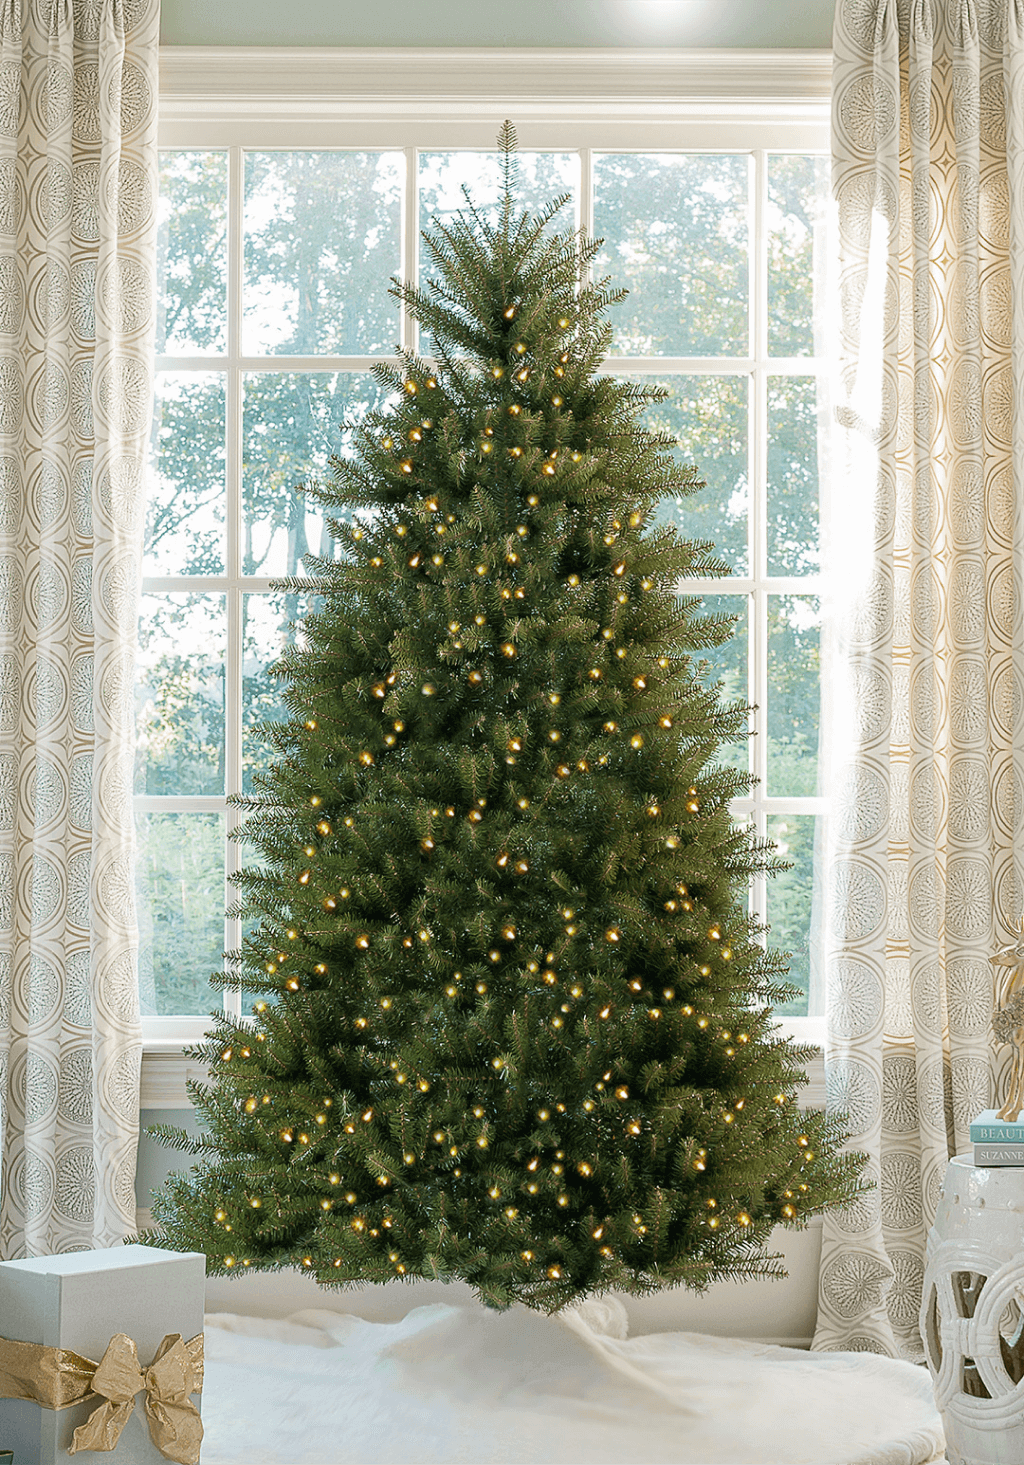 King of Christmas 6.5' Yorkshire Fir Artificial Christmas Tree with 500 Warm White LED Lights